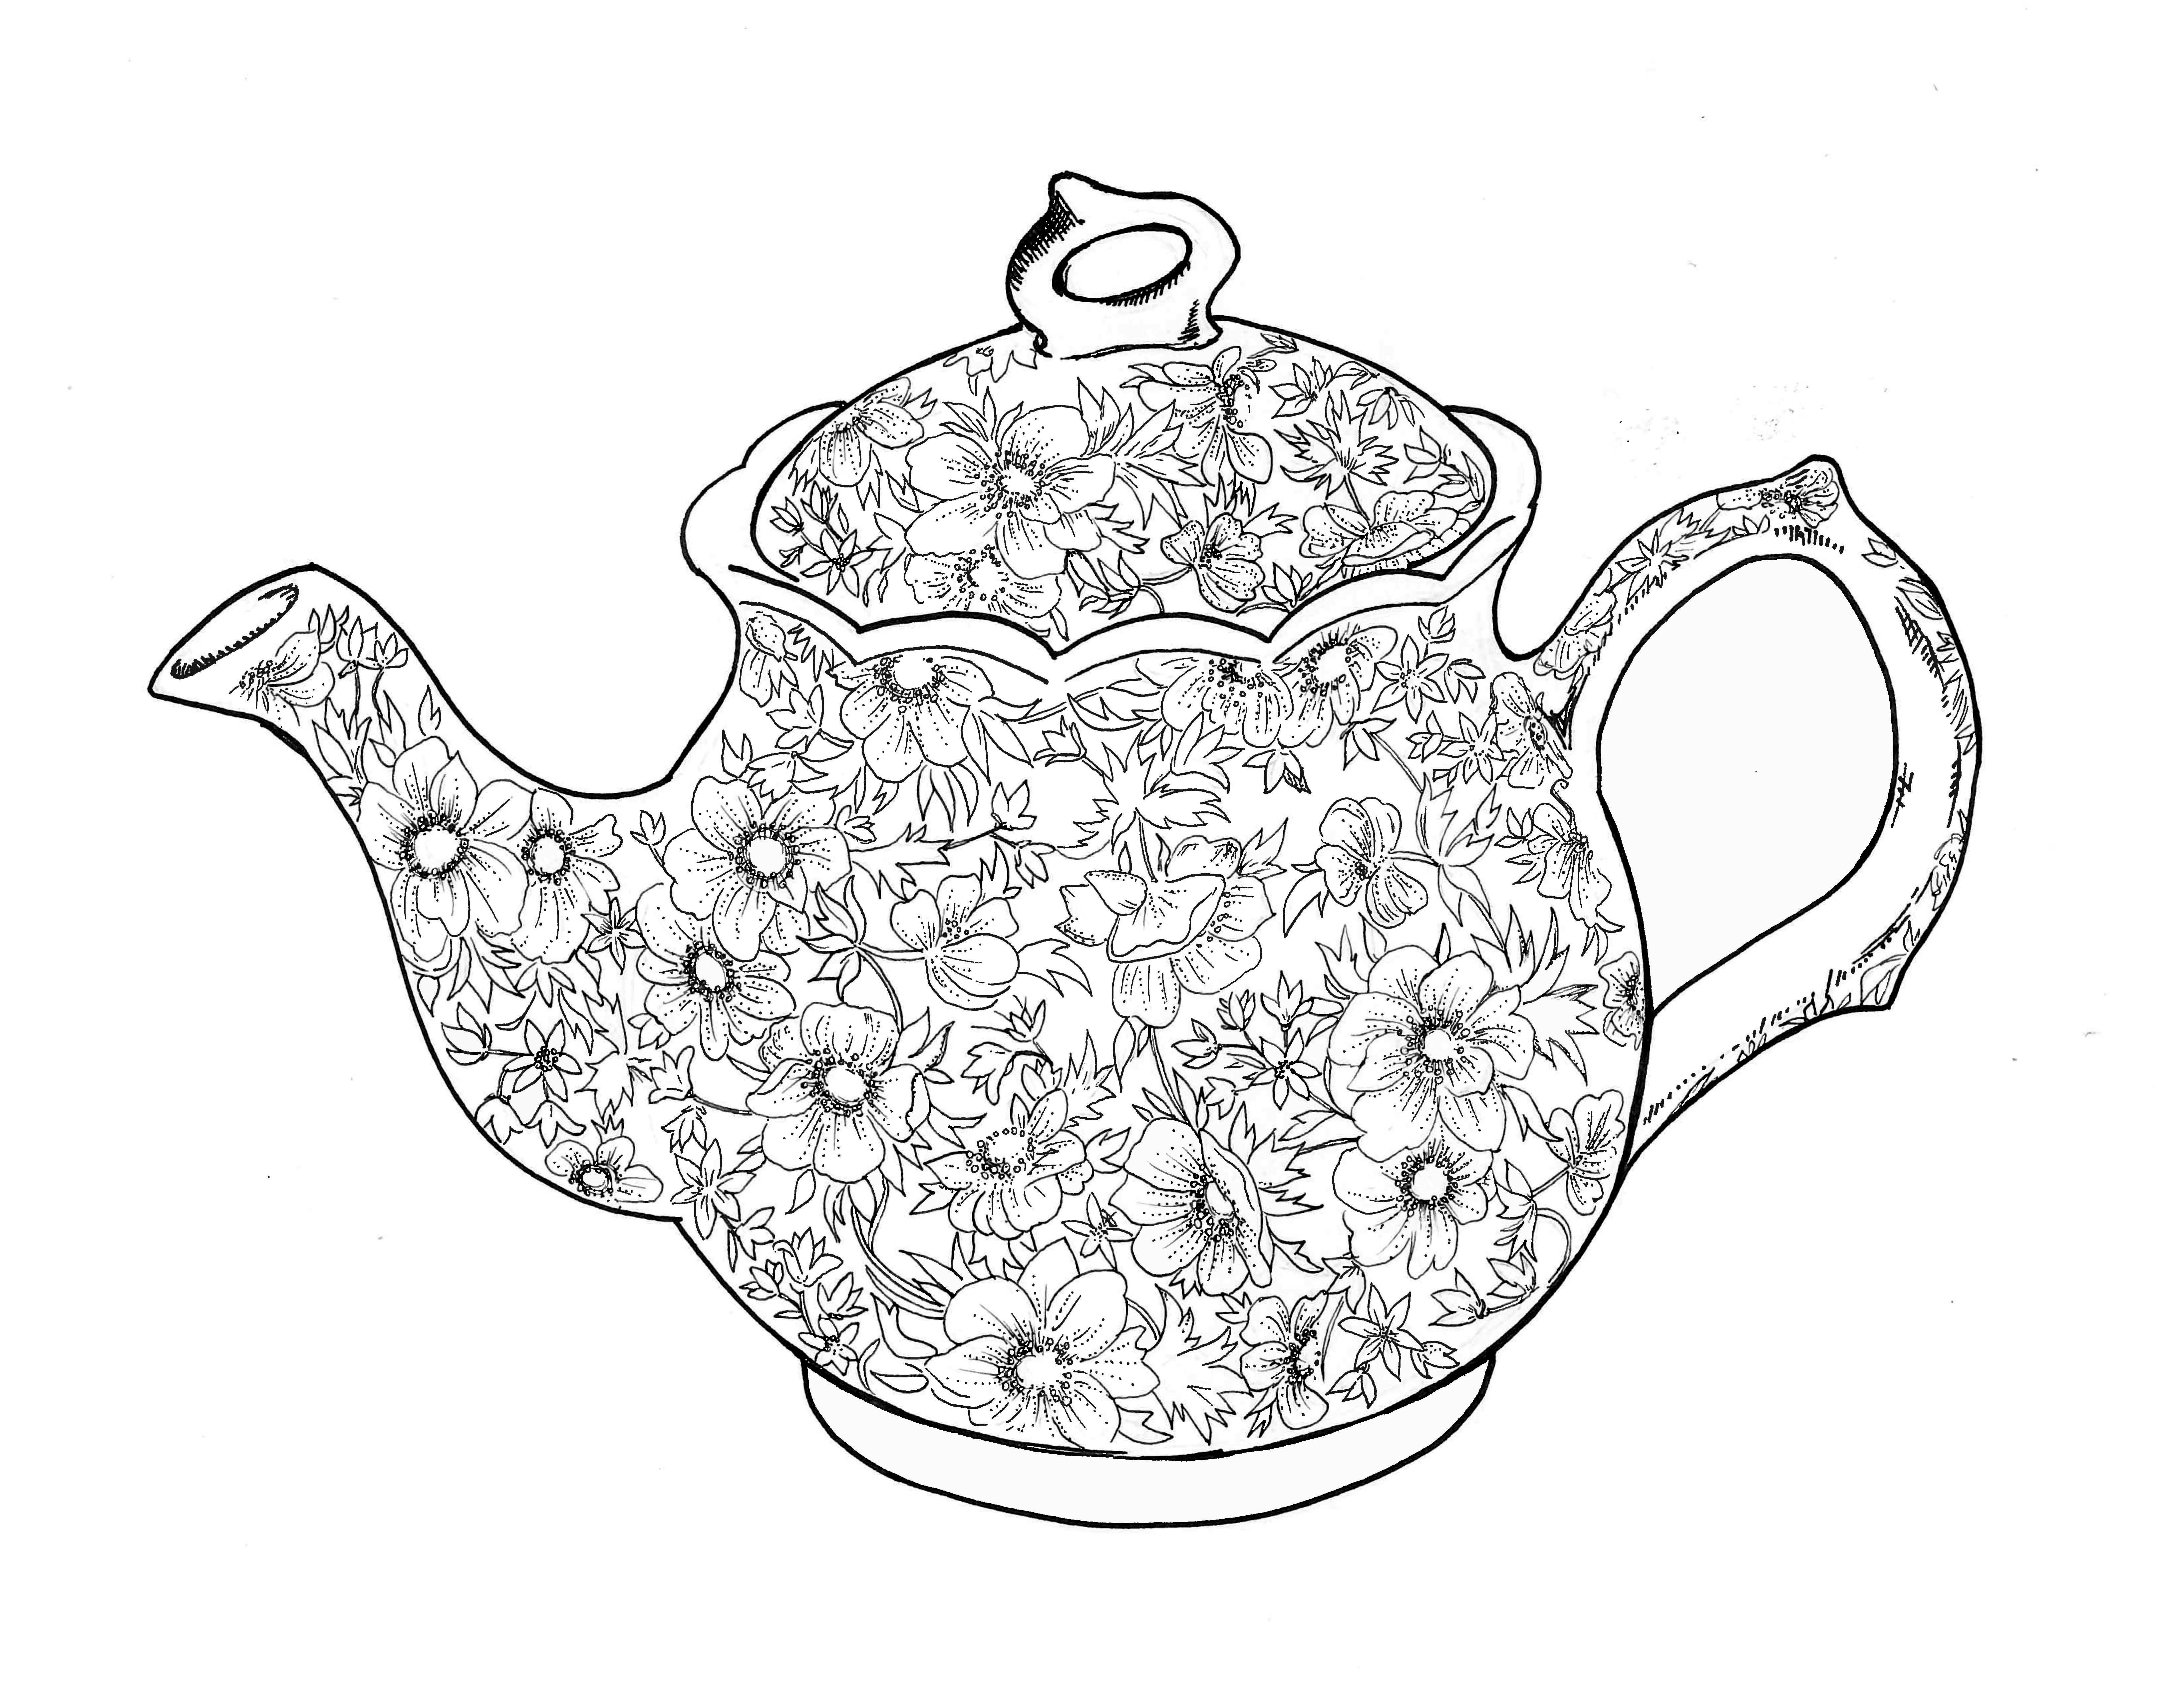 Free Teapot Coloring Book, Download Free Clip Art, Free Clip Art On - Free Teapot Printable